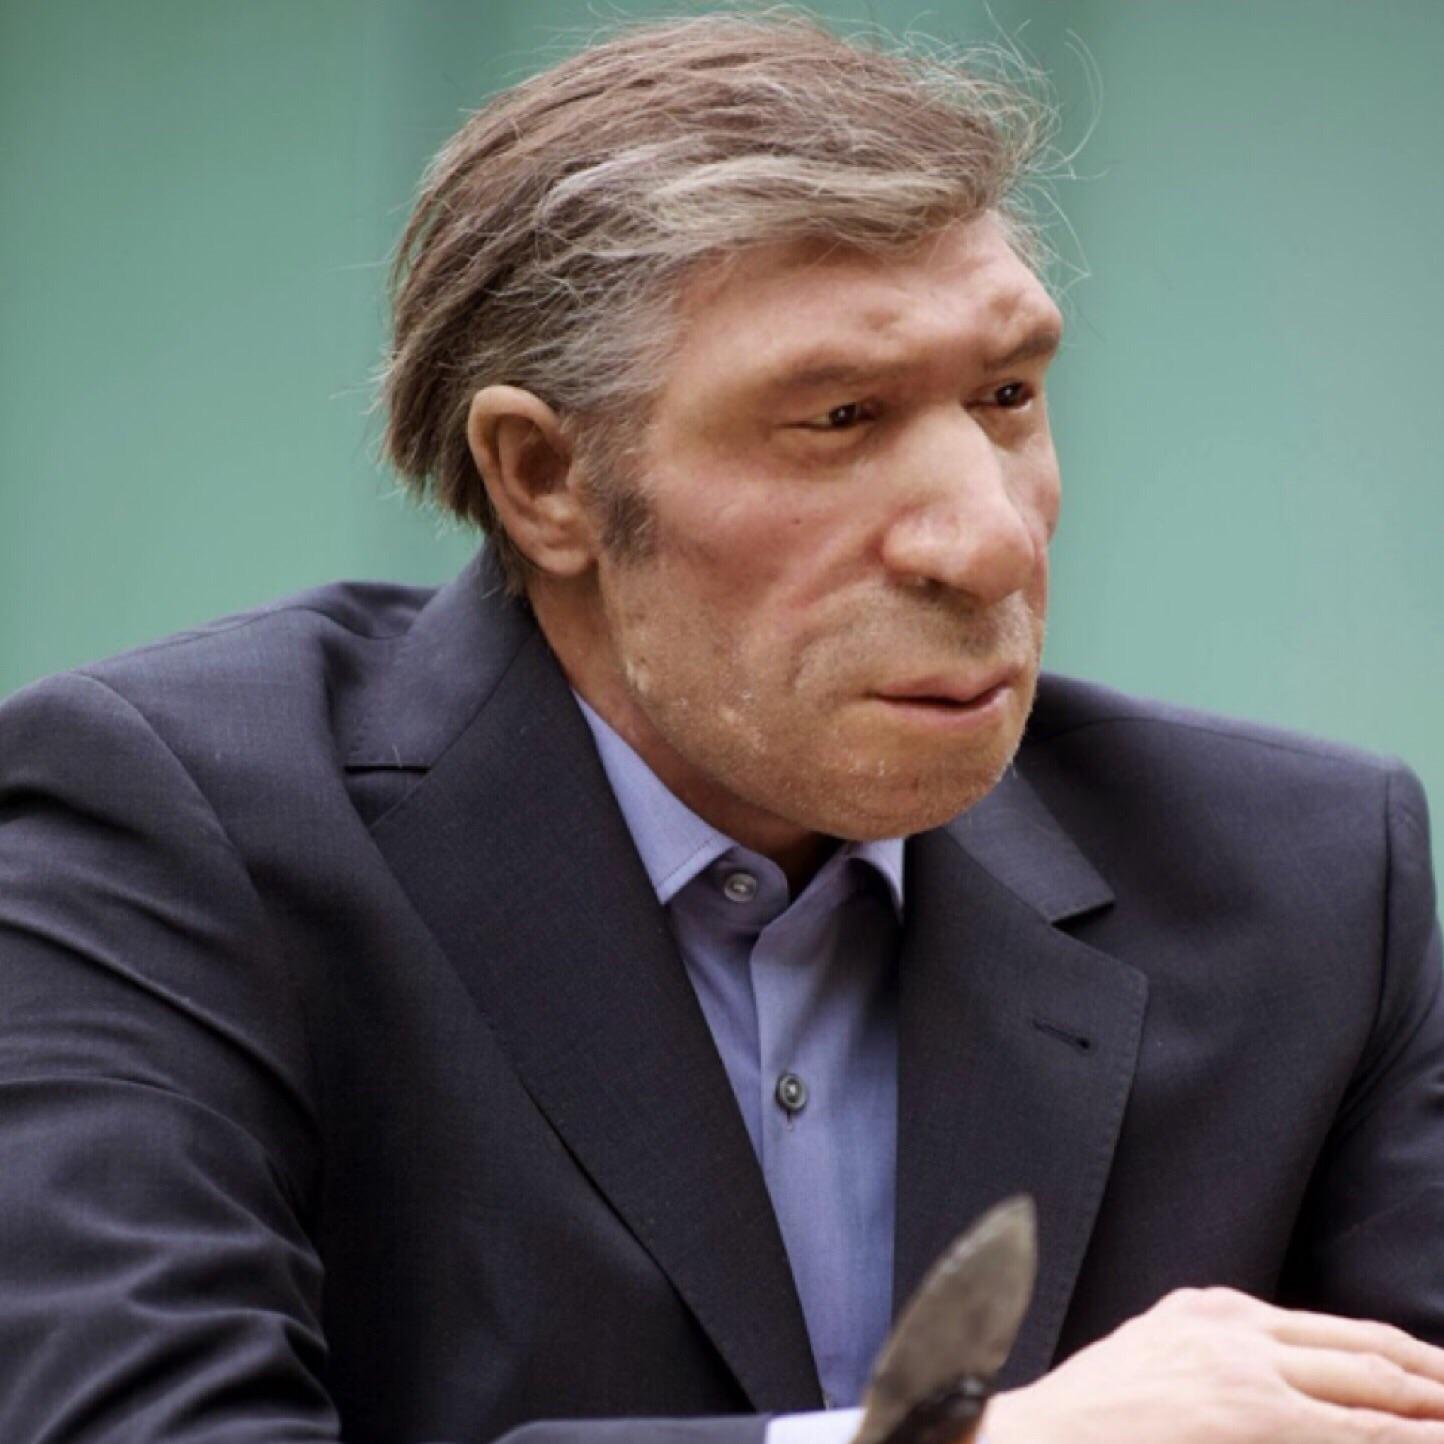 Scientists recreate what Neanderthals would look like today.